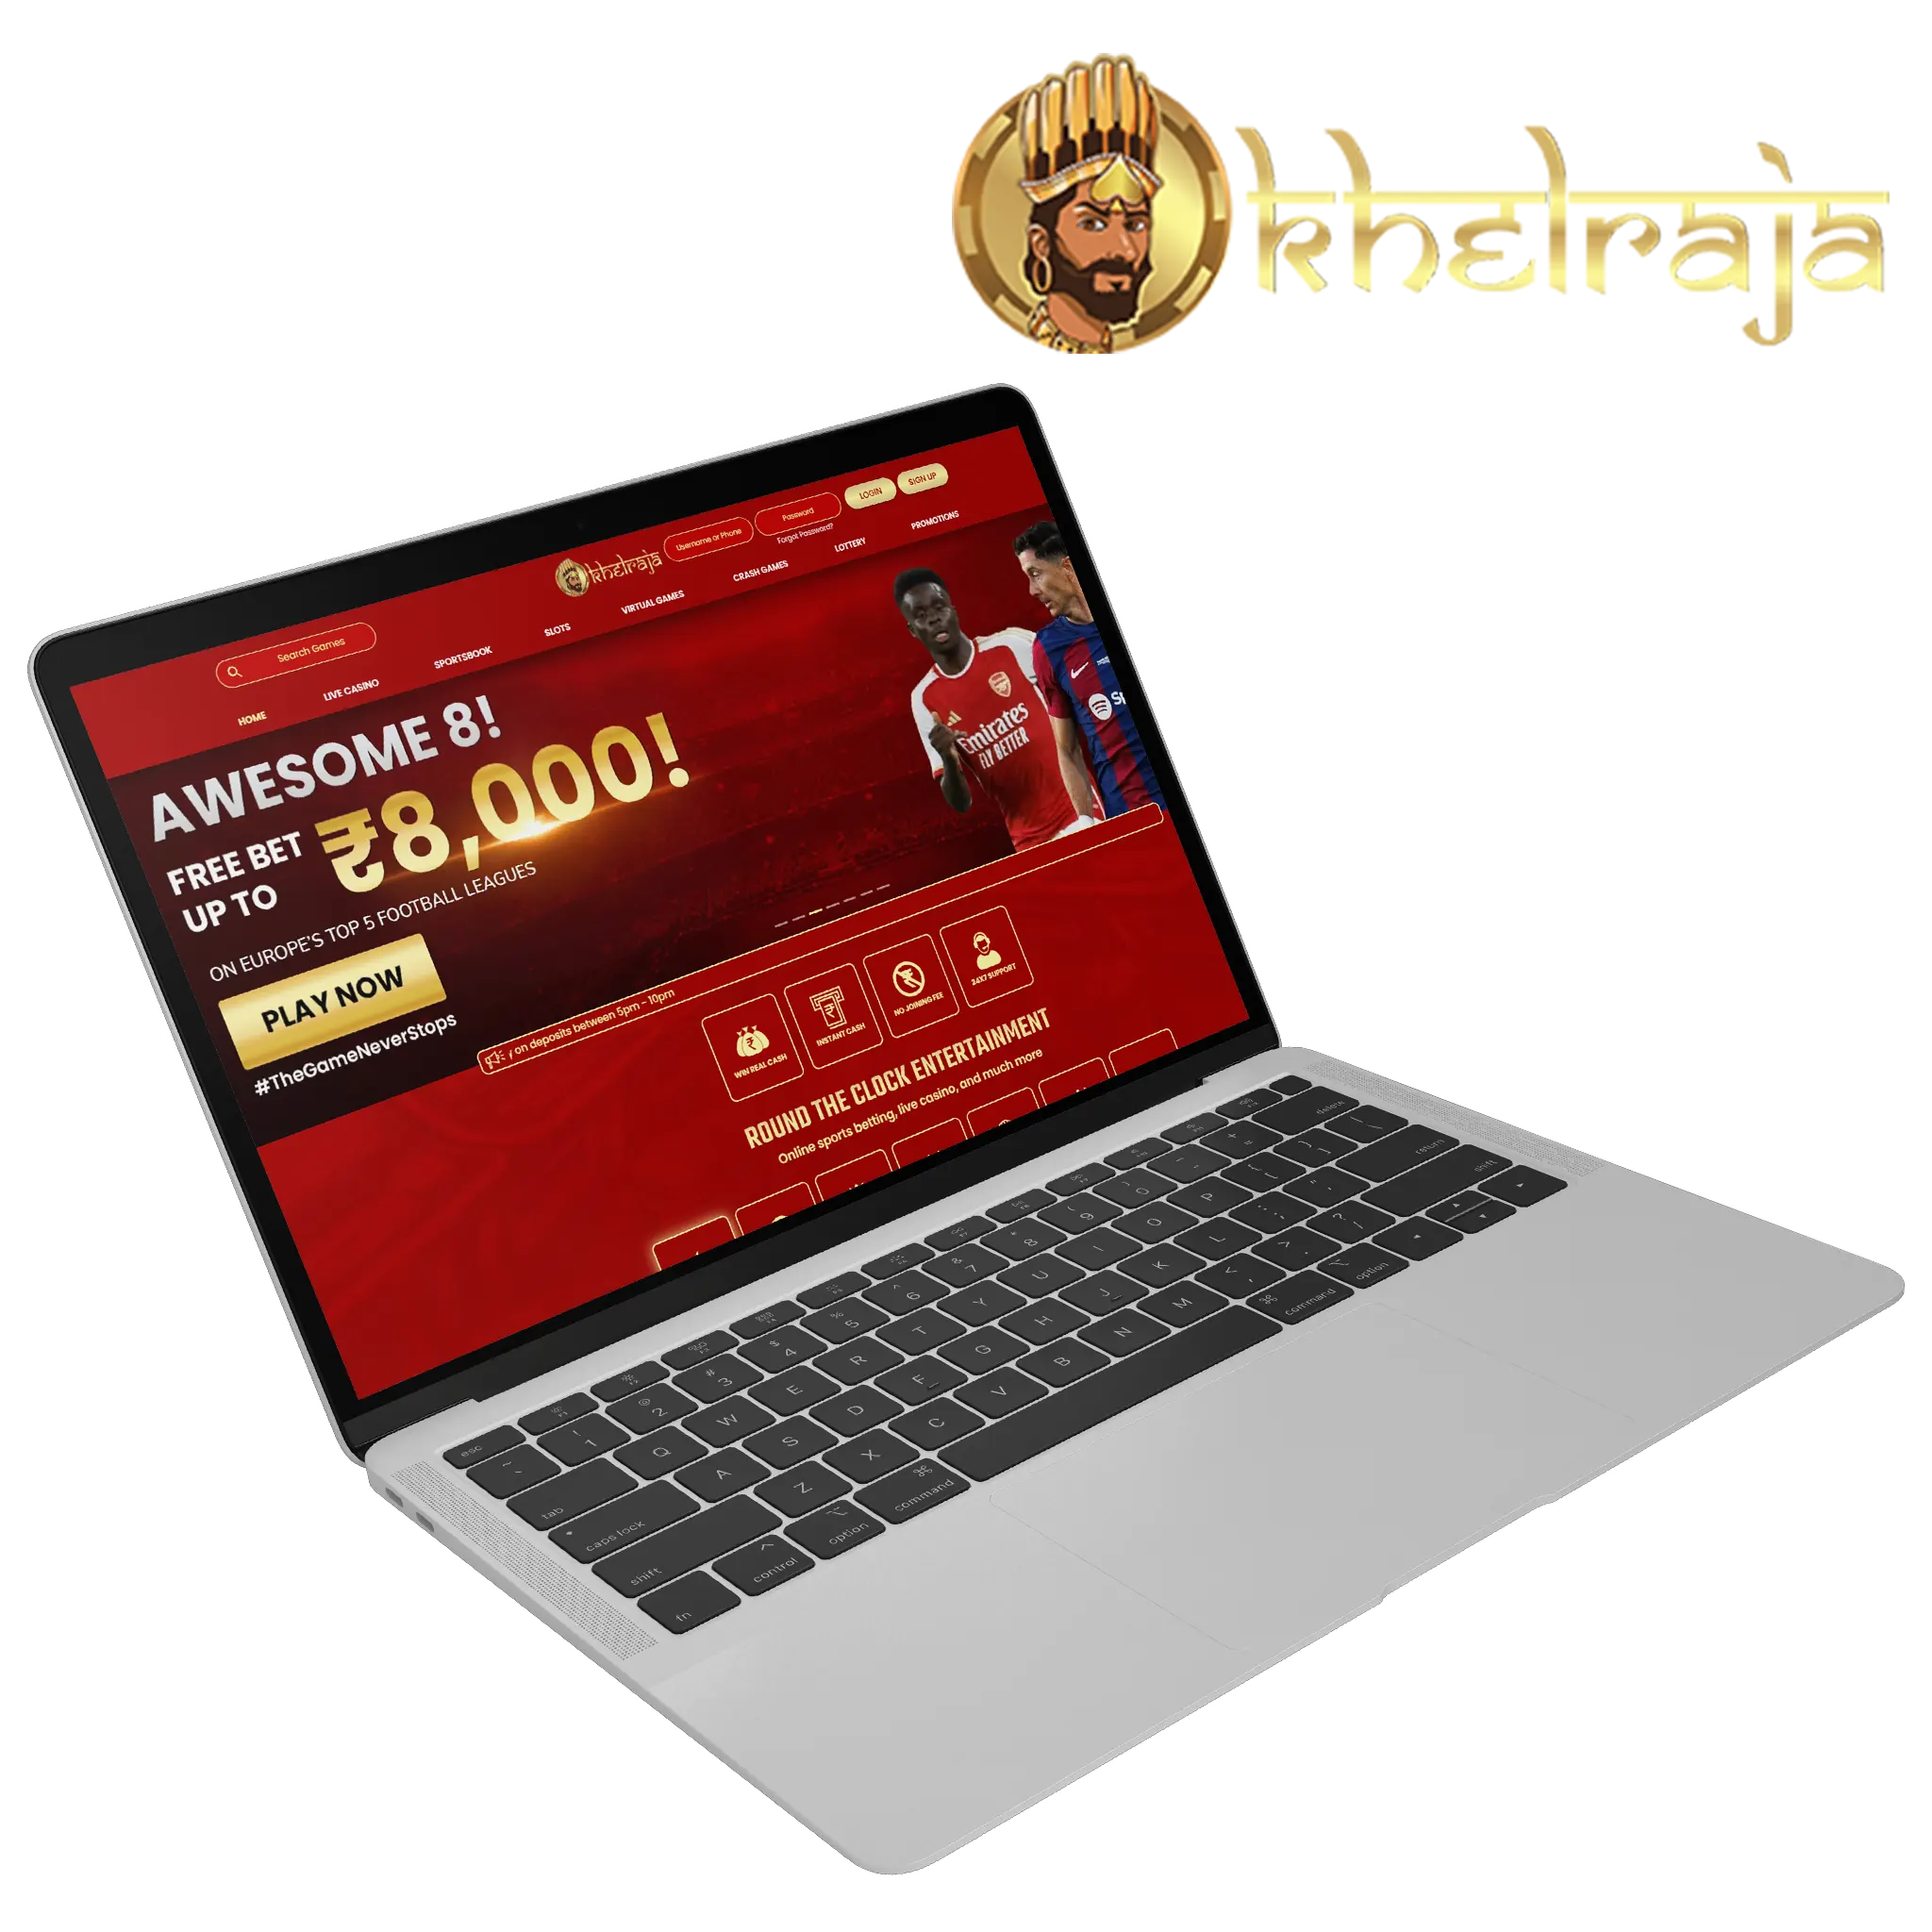 Khelraja users can bet on cricket, football, volleyball, baseball and dozens of other destinations.